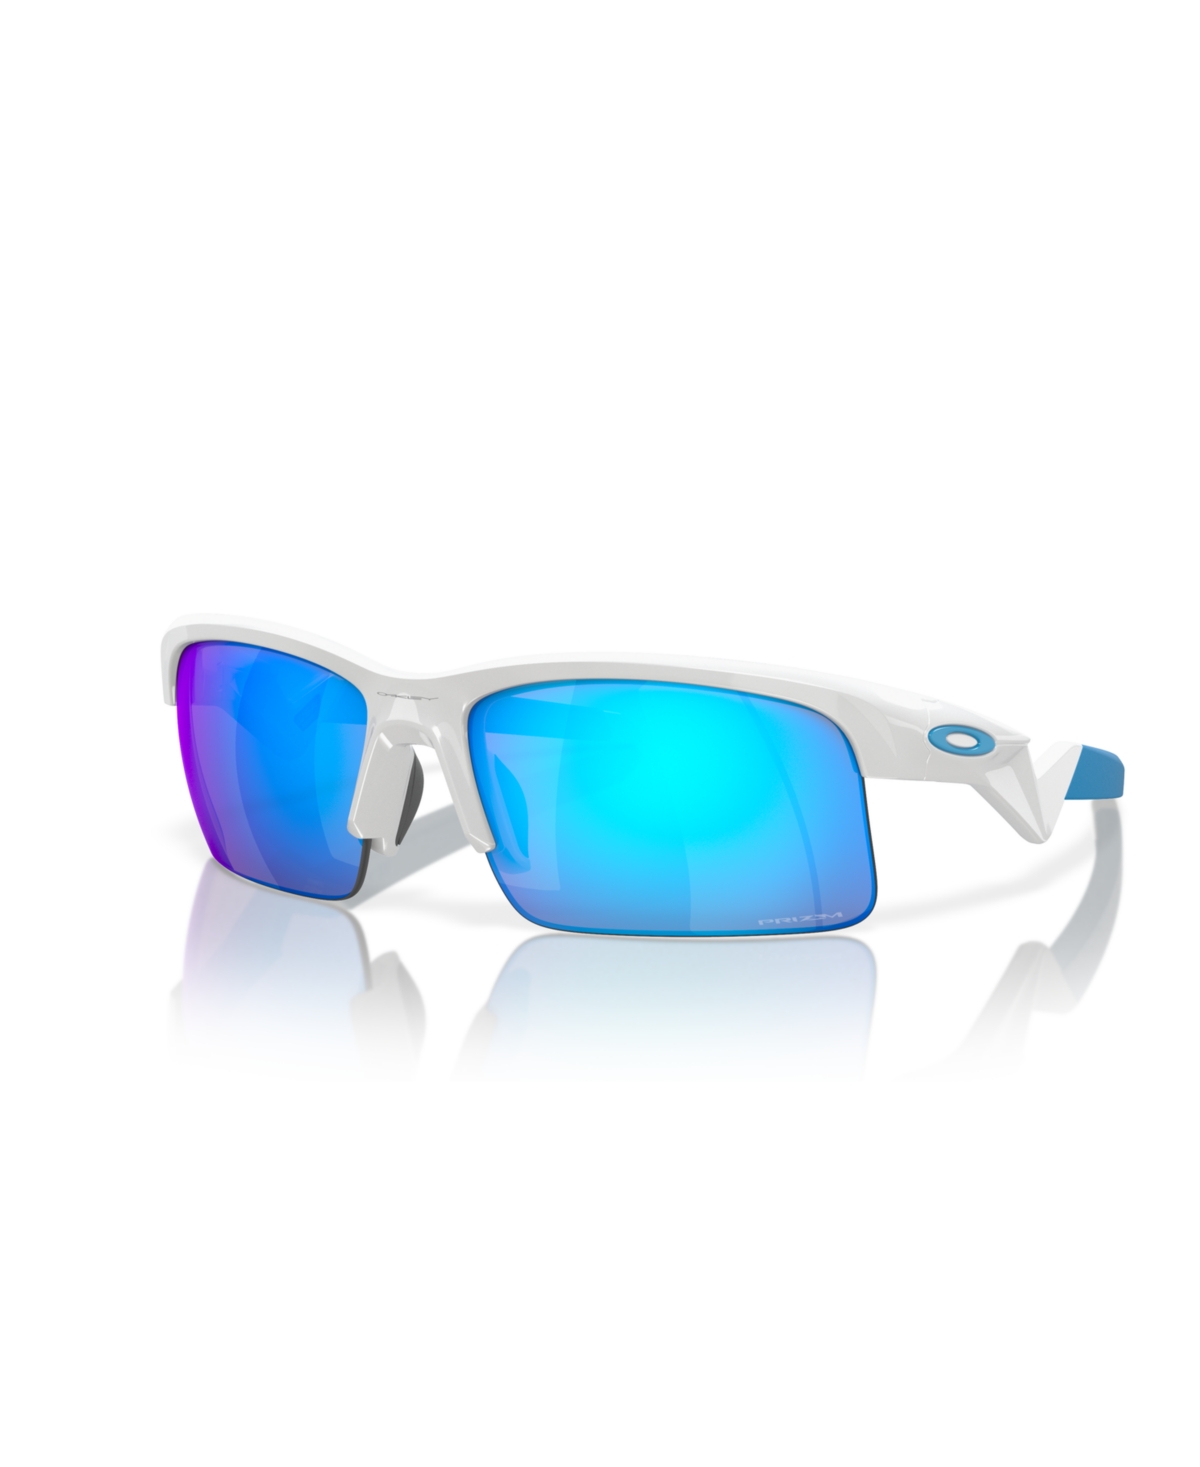 Oakley Jr Kid's Sunglasses, Capacitor Youth Fit Oj9013 In Polished White,blue